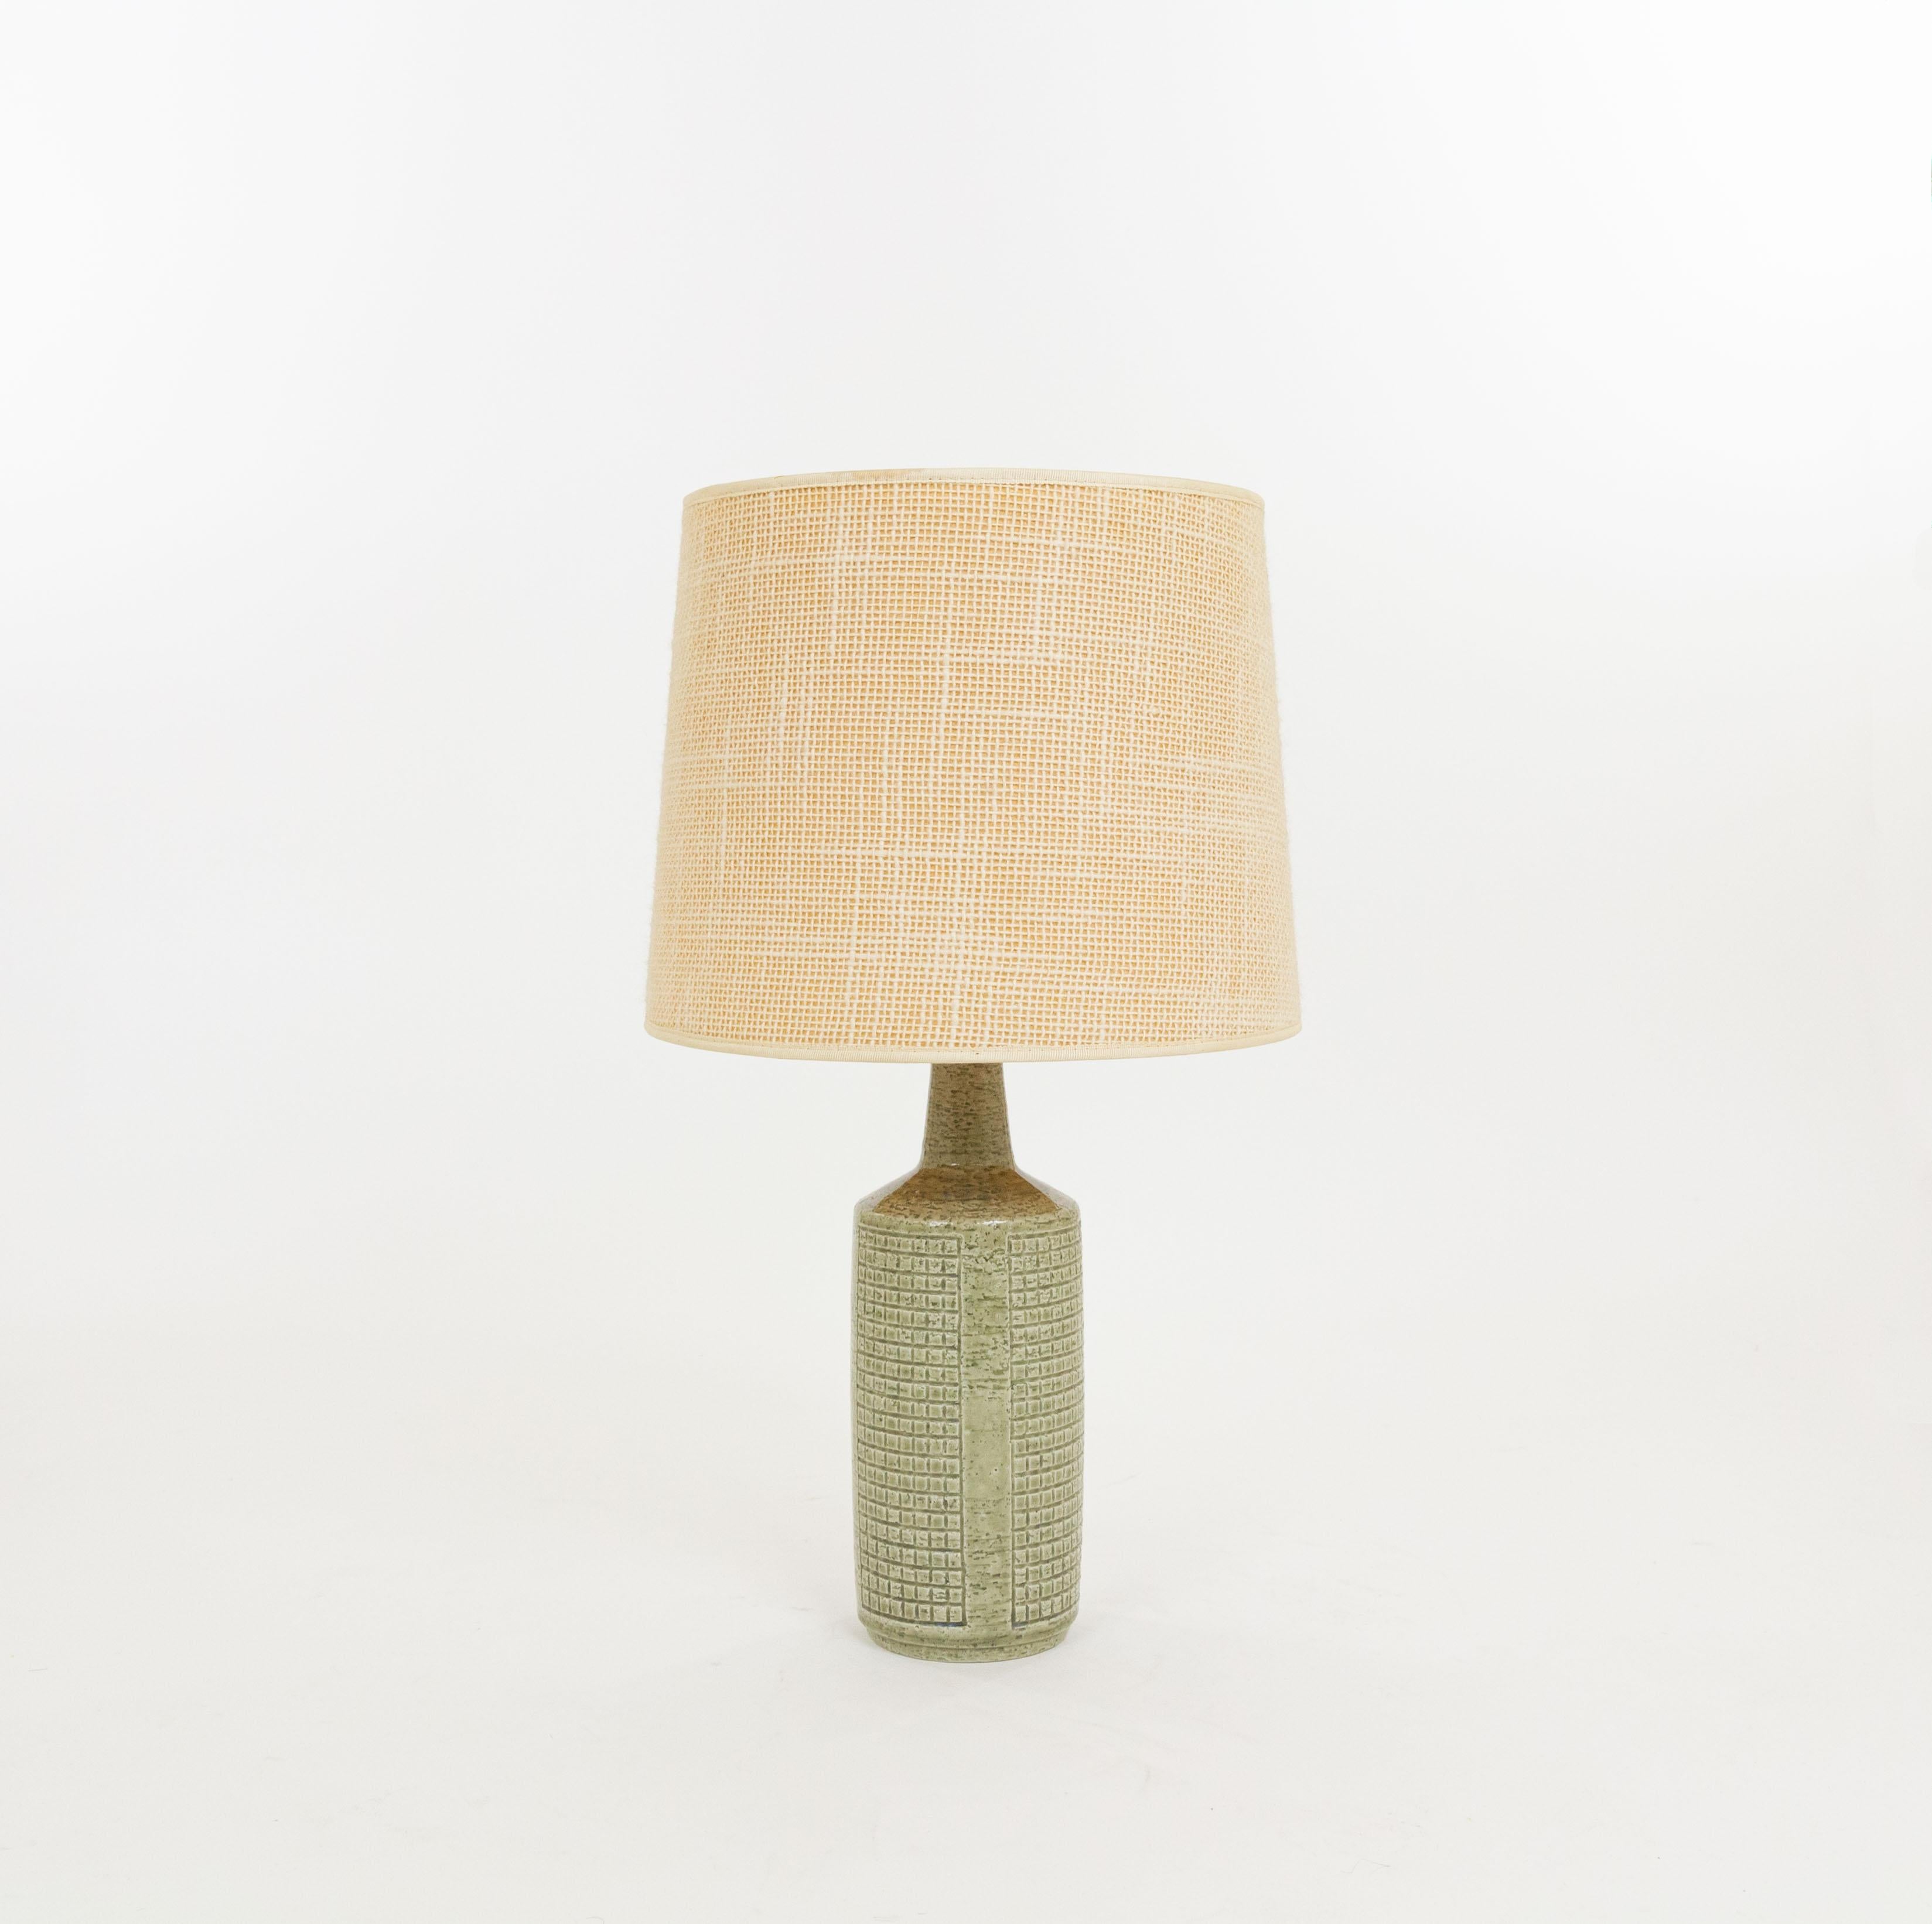 Model DL/30 table lamp made by Annelise and Per Linnemann-Schmidt for Palshus in the 1960s. The colour of the handmade decorated base is Grain Green. It has impressed, geometric patterns.

The lamp comes with its original lampshade holder. The